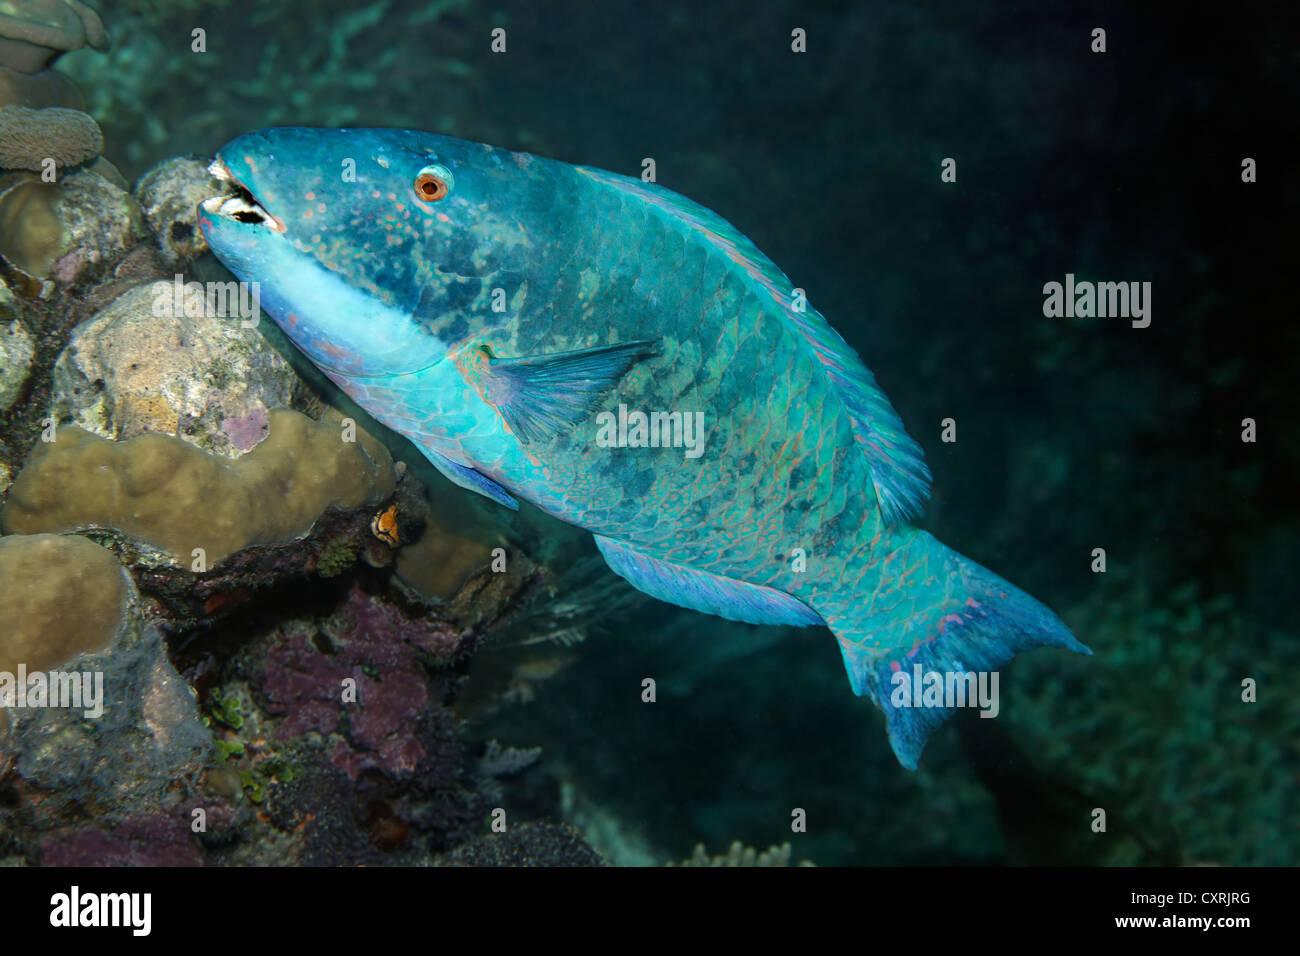 Parrot fish (Scarus sp.) swimming over a coral reef, Great Barrier Reef, a UNESCO World Heritage Site, Queensland, Cairns Stock Photo